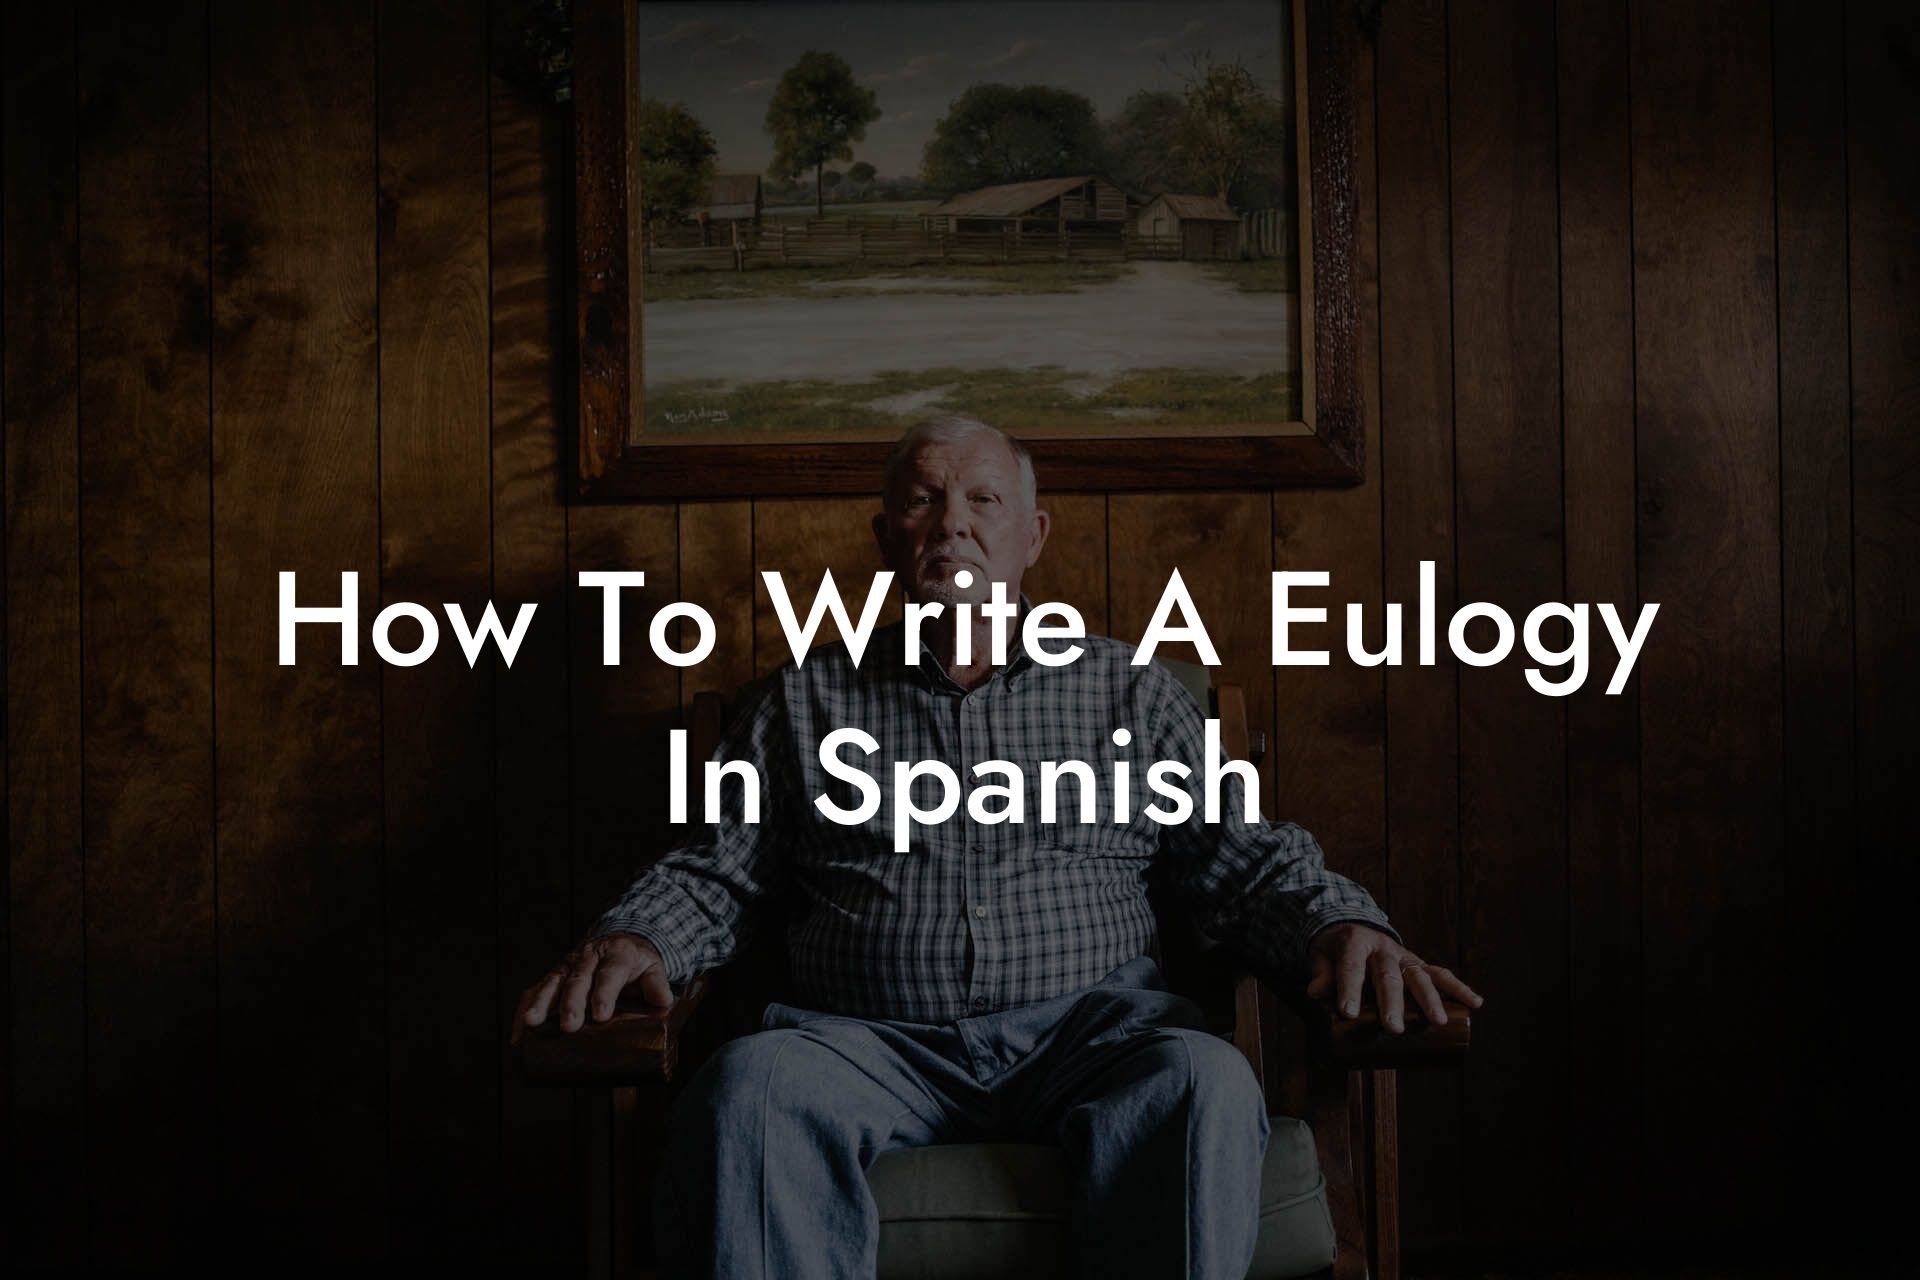 How To Write A Eulogy In Spanish